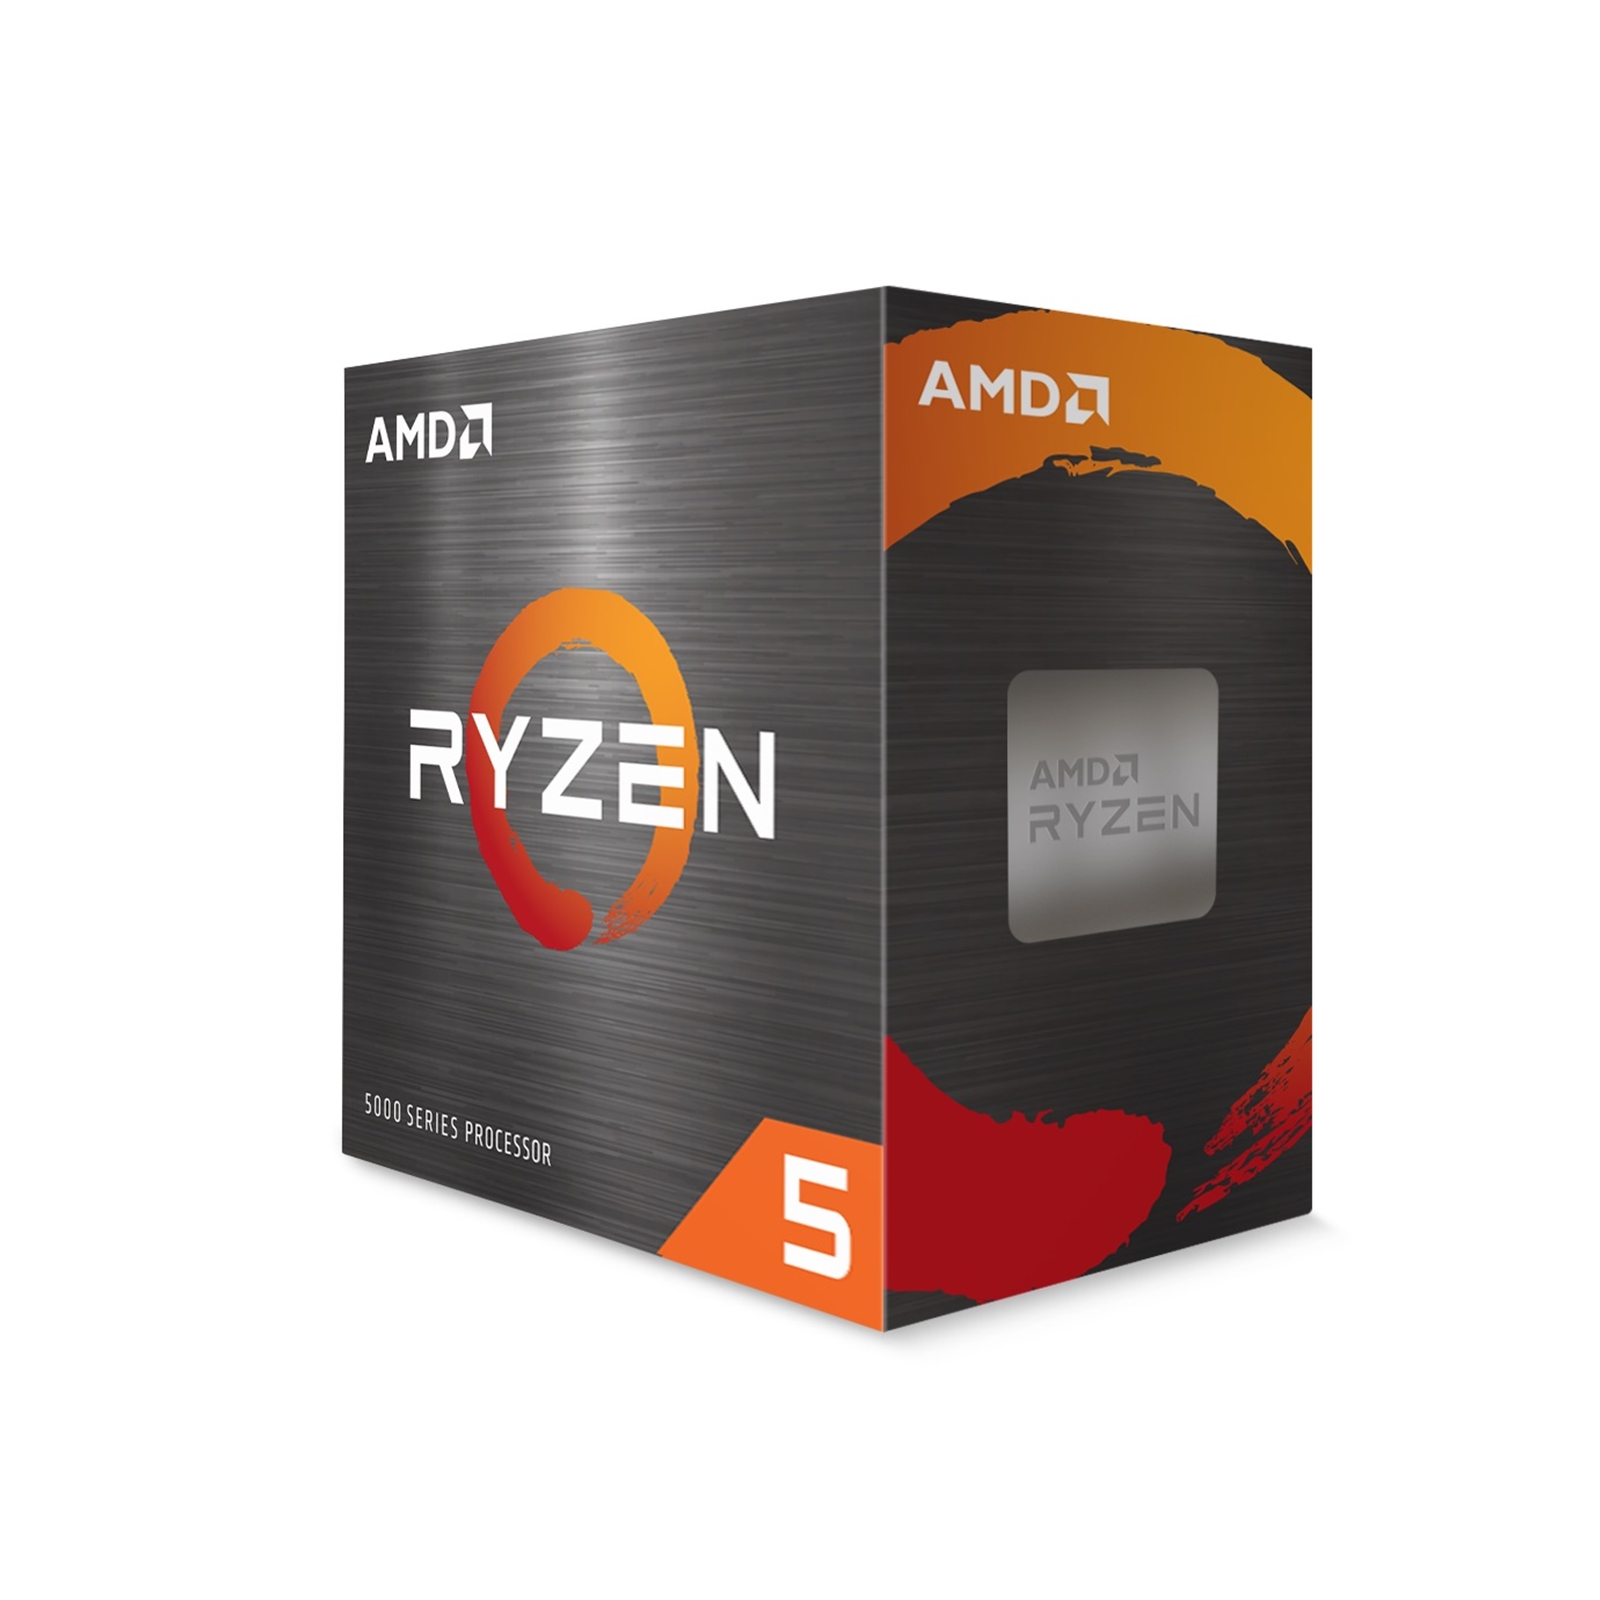 AMD Ryzen 5 5600X 3.7GHz 6 Core AM4 Socket Overclockable Processor with Wraith Stealth Cooler